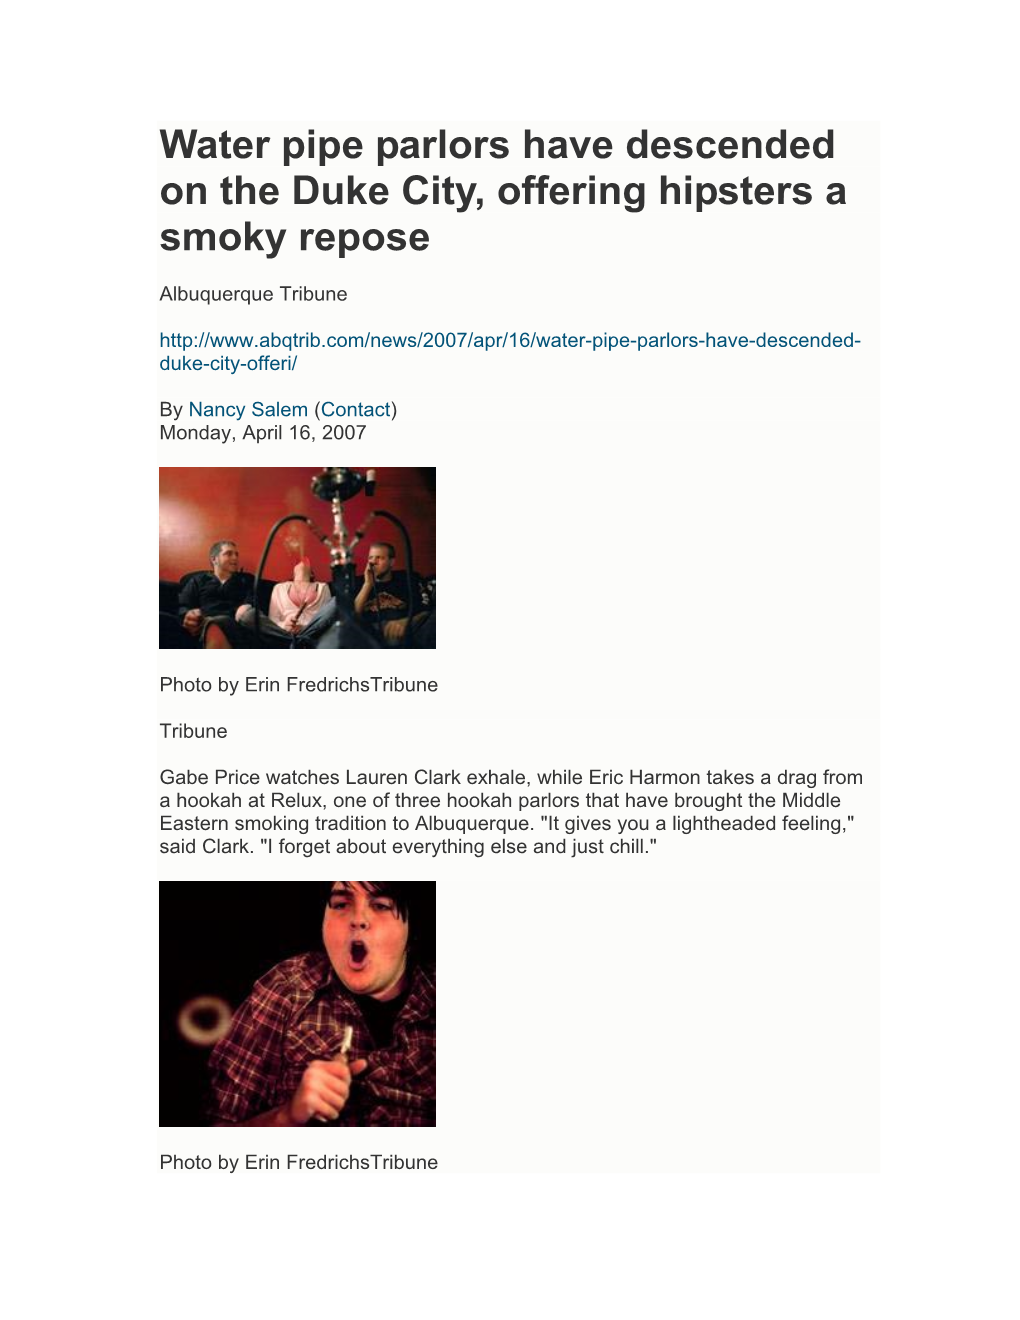 Water Pipe Parlors Have Descended on the Duke City, Offering Hipsters a Smoky Repose